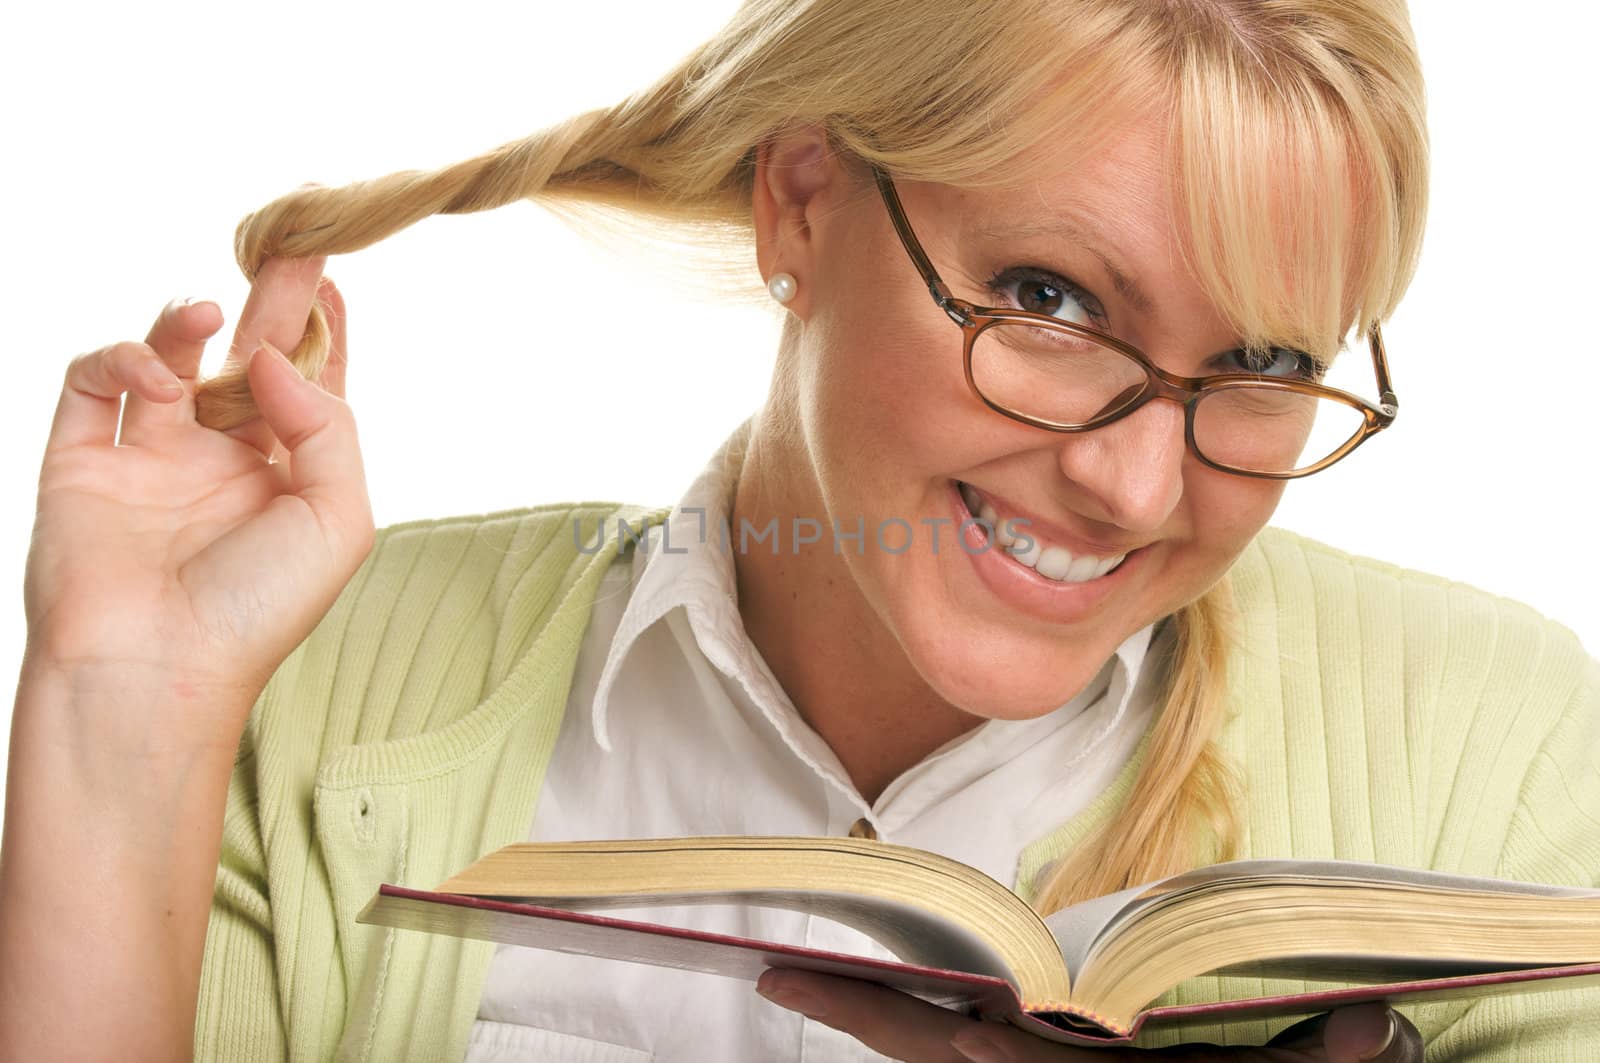 Female With Ponytails Reads Her Book isolated on a White Background.